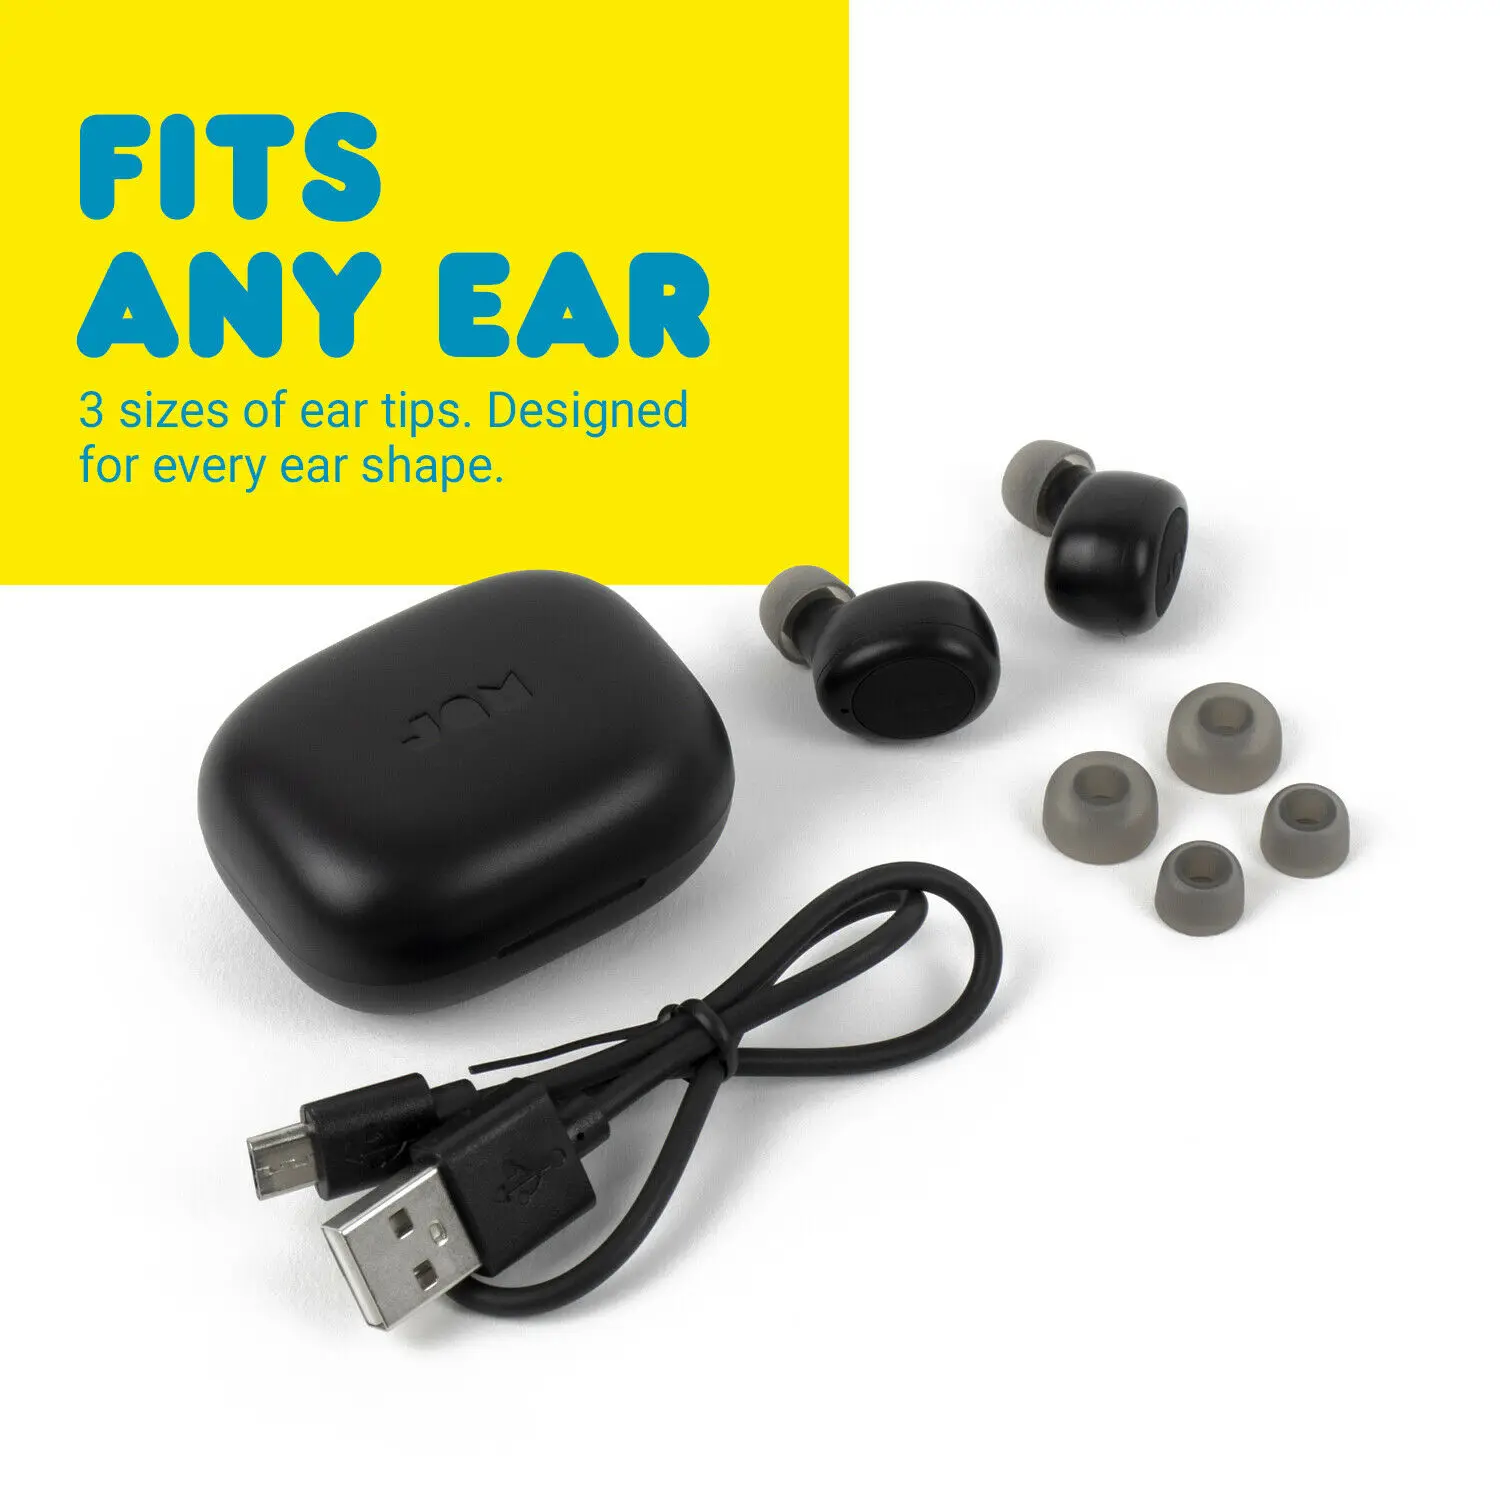 Jam Live Loud TWS Earbuds Wireless, Up to 12hrs Playtime, Sweat Resistant enlarge